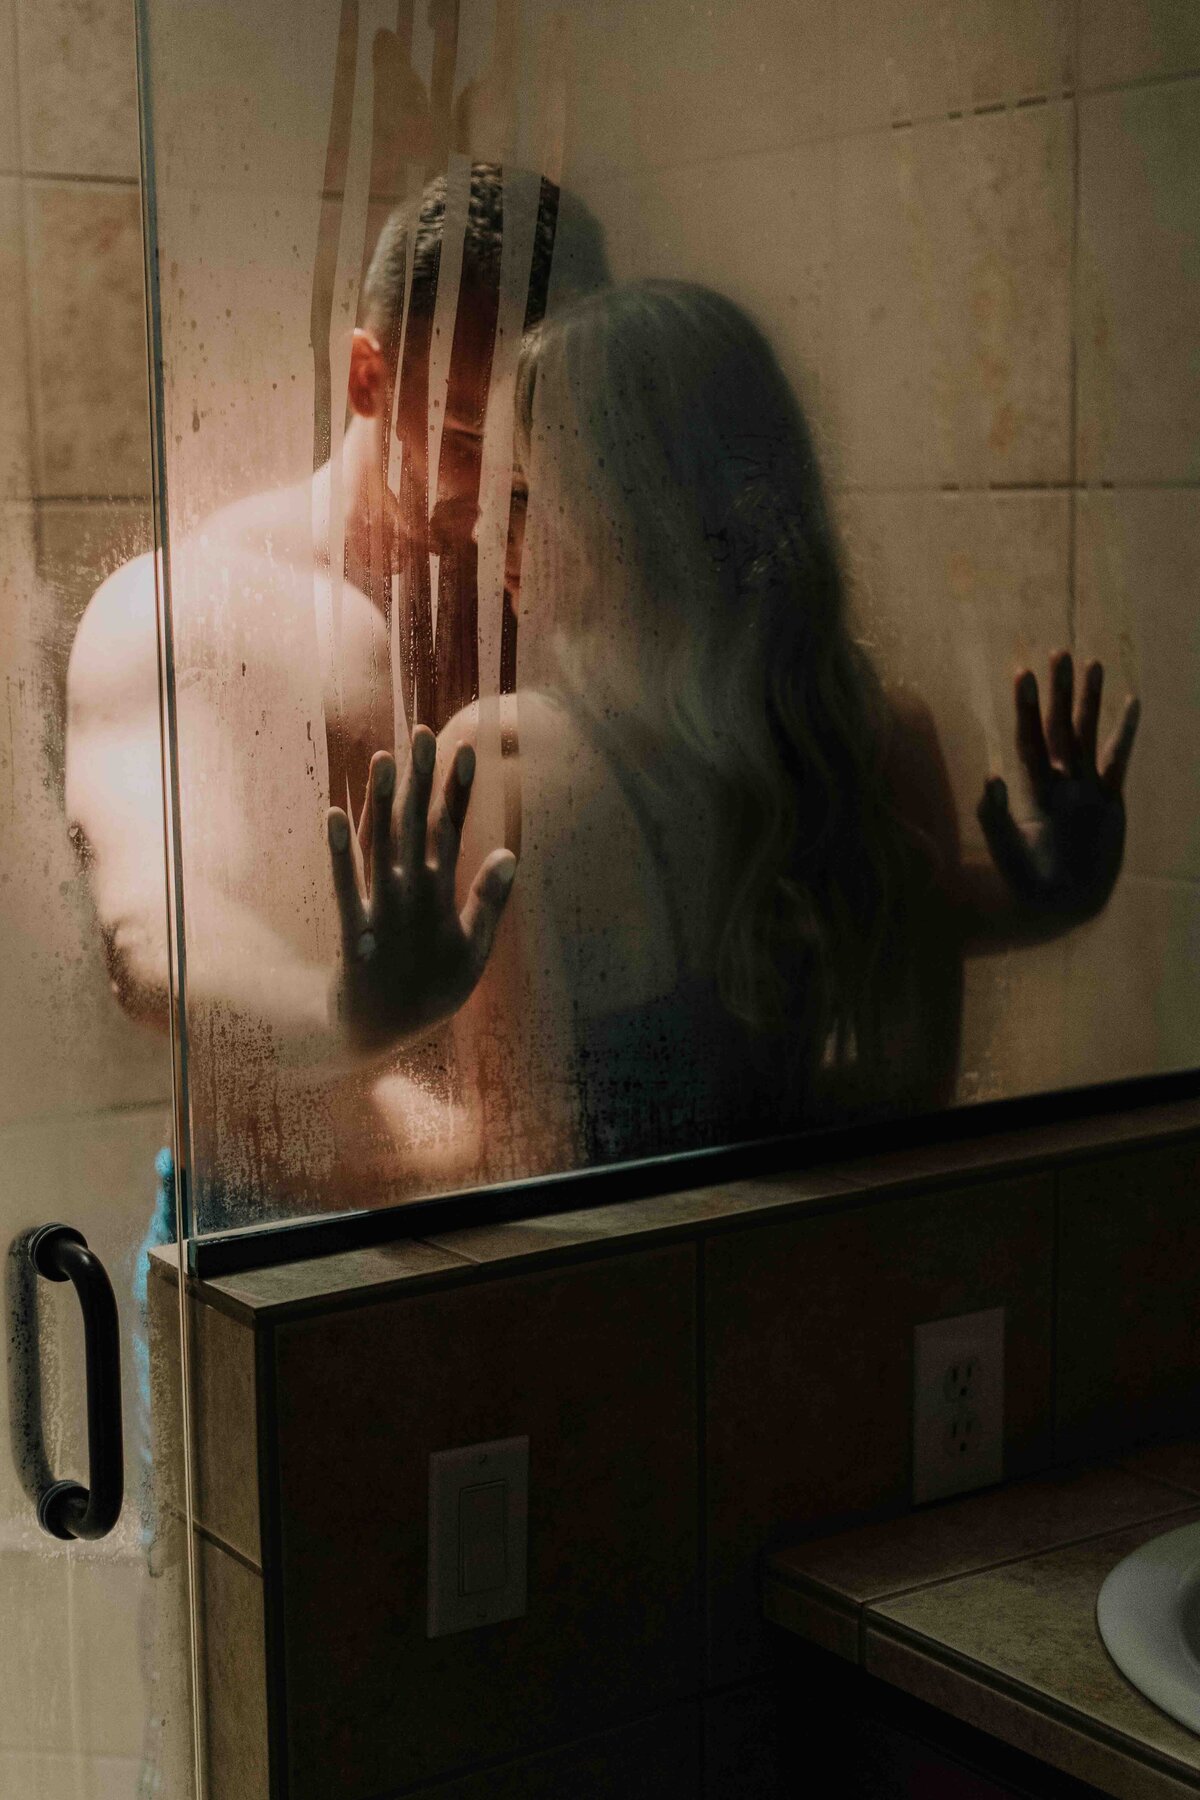 A couple steams up the shower and leaves hand marks on the glass